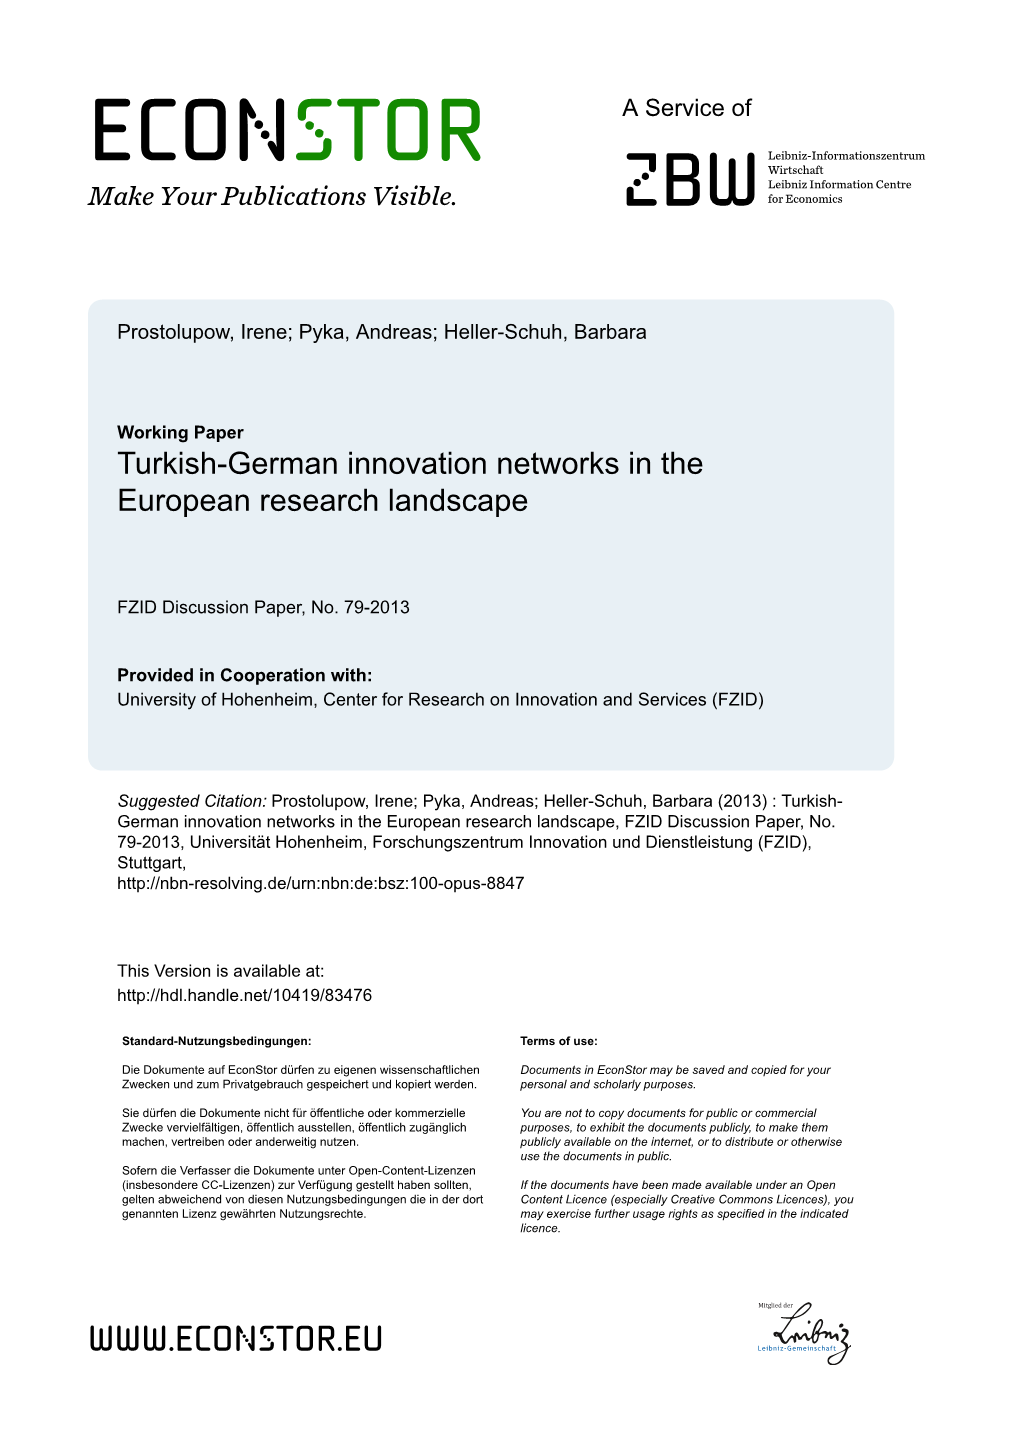 Turkish-German Innovation Networks in the European Research Landscape